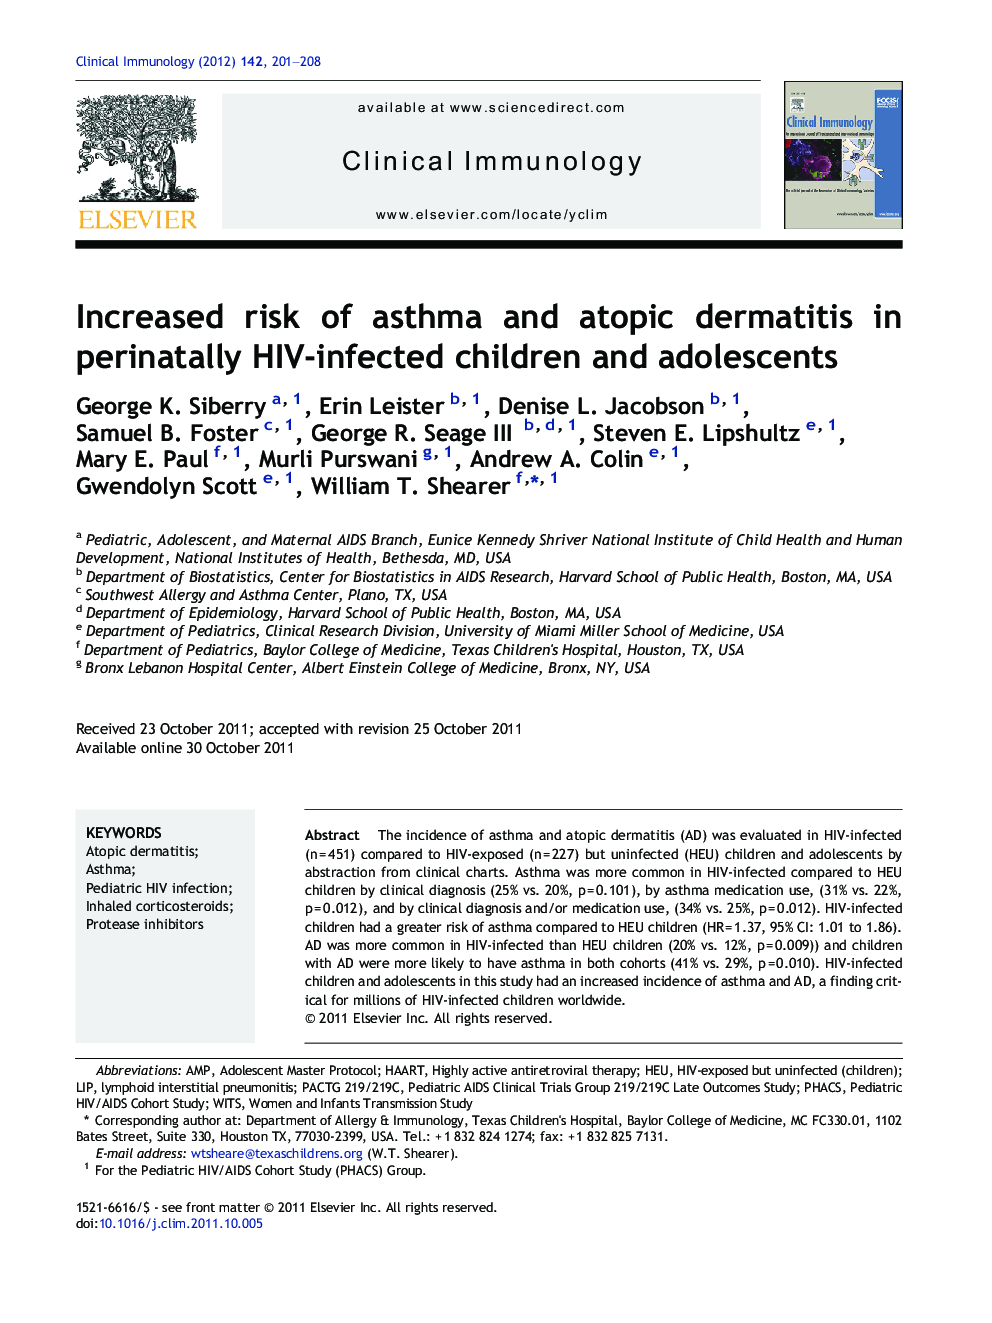 Increased risk of asthma and atopic dermatitis in perinatally HIV-infected children and adolescents